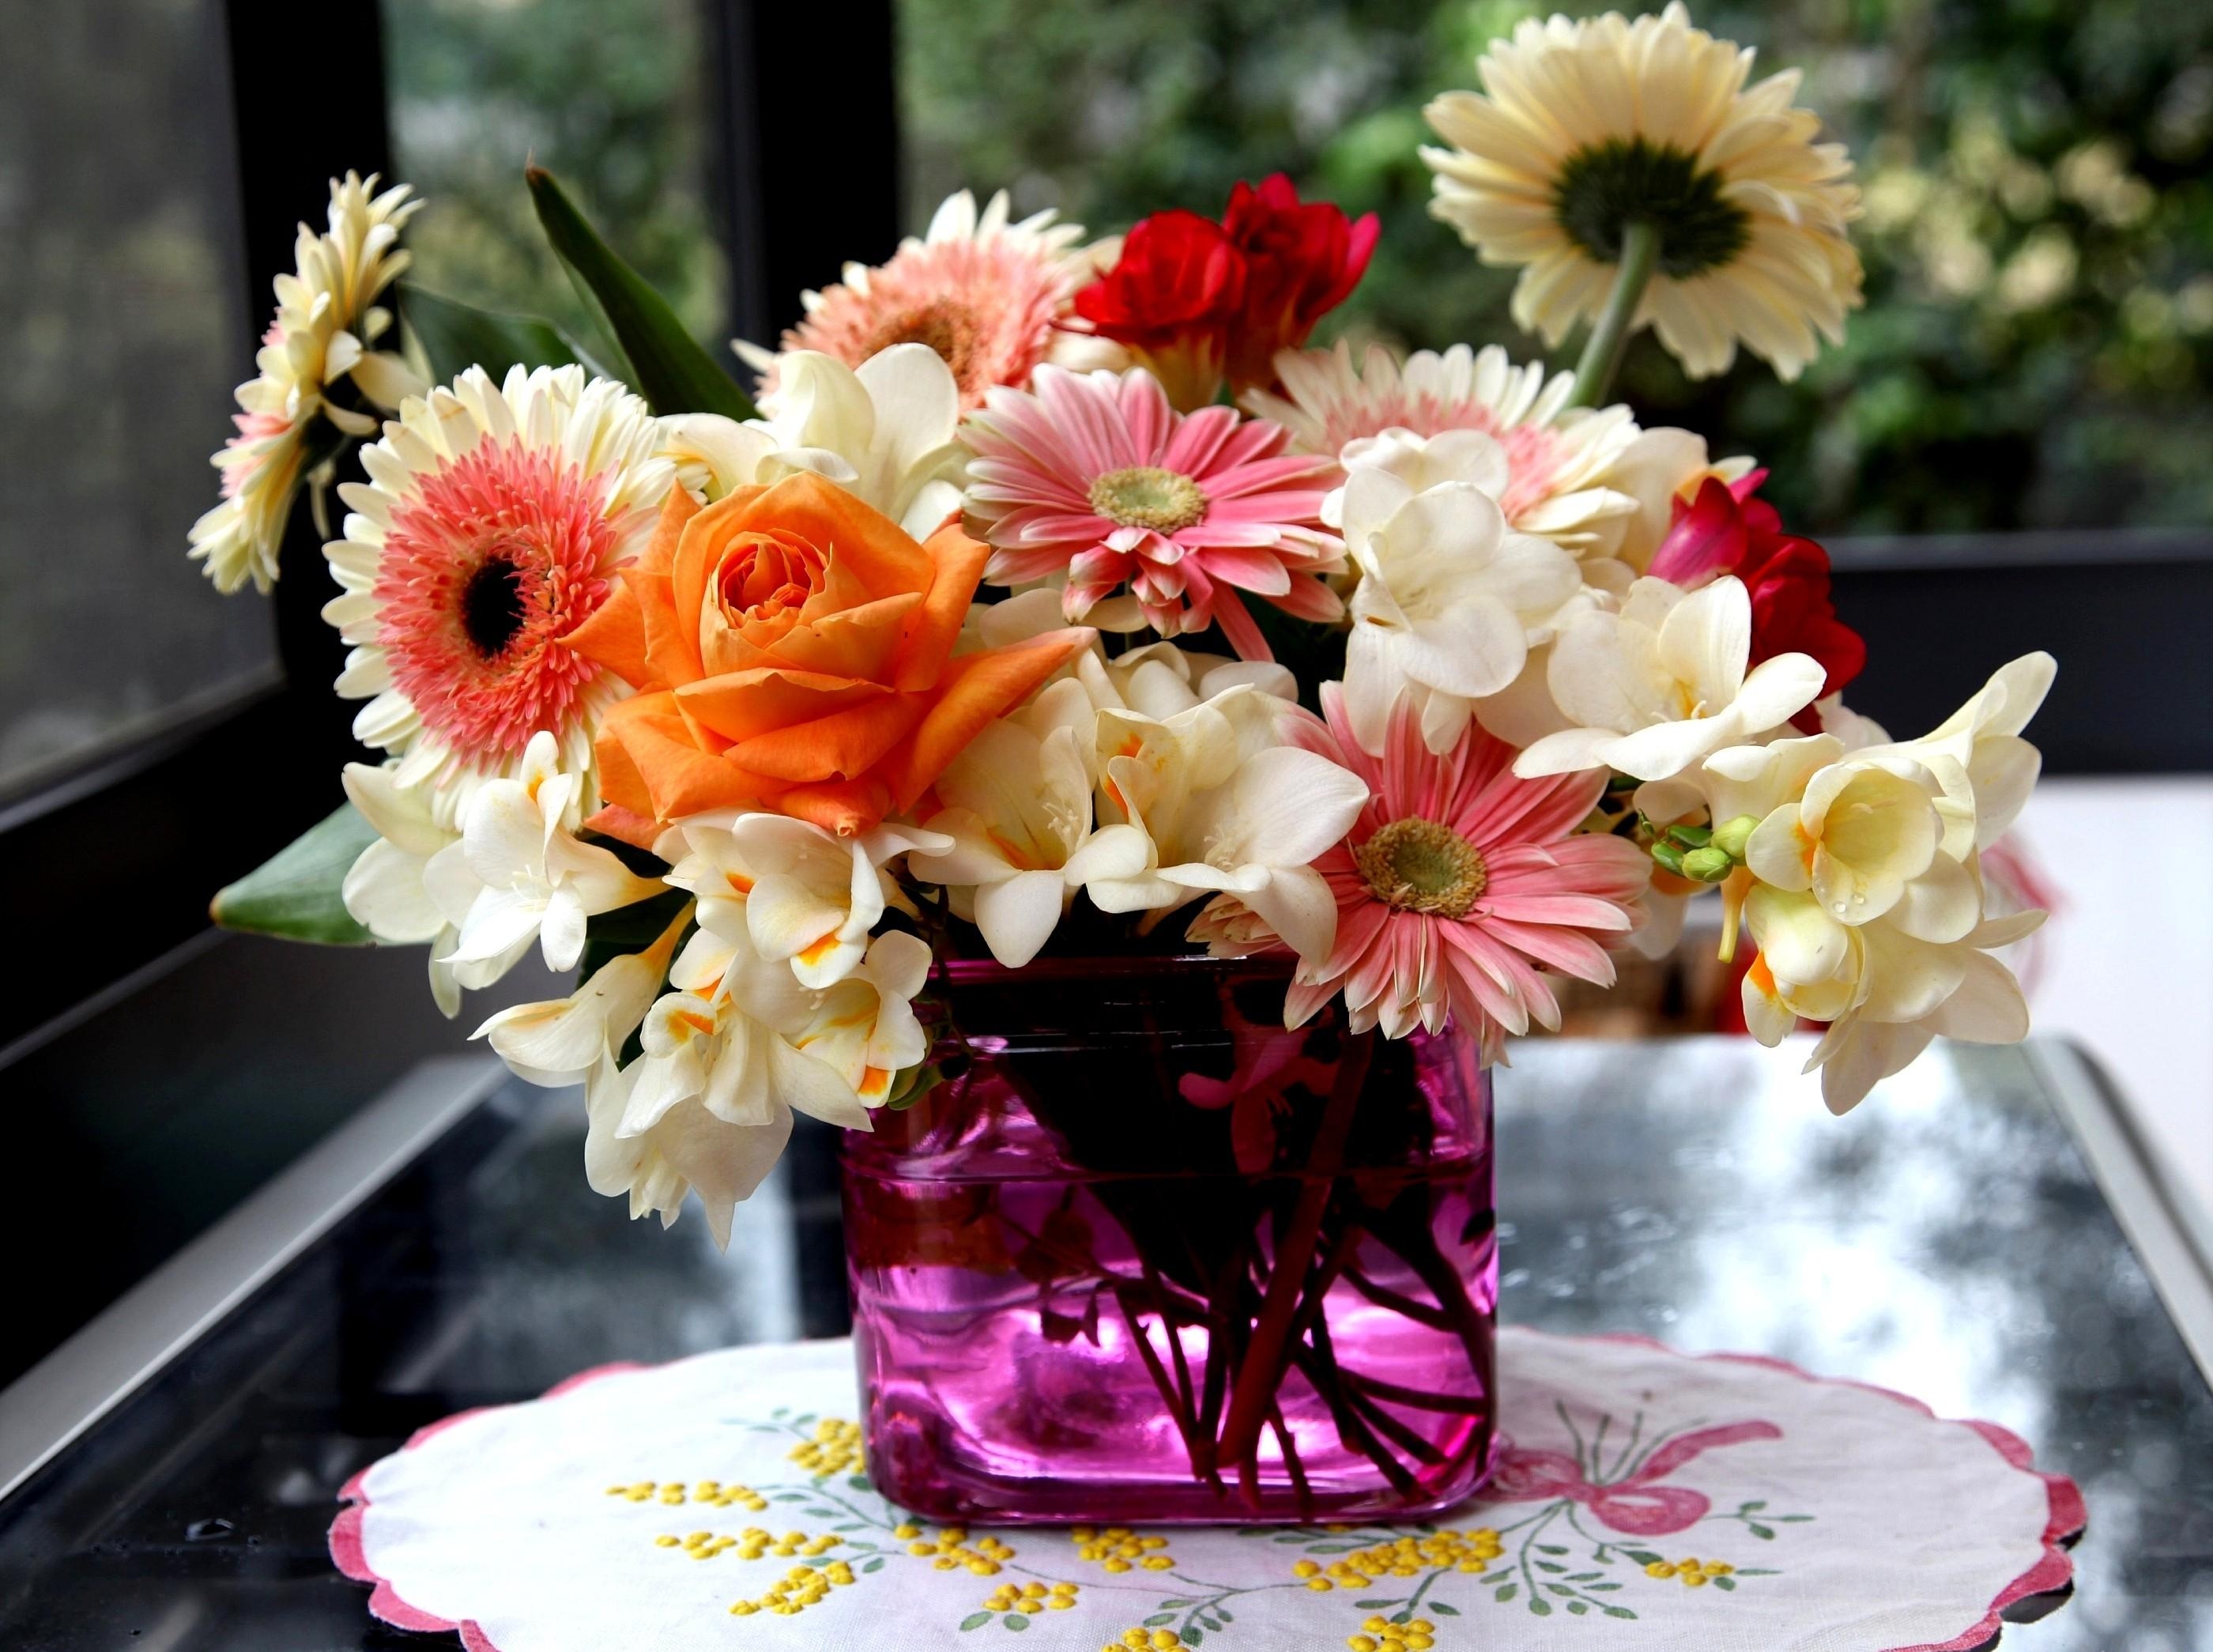 bouquet, vase, roses, flowers, gerberas, composition, freesia Full HD